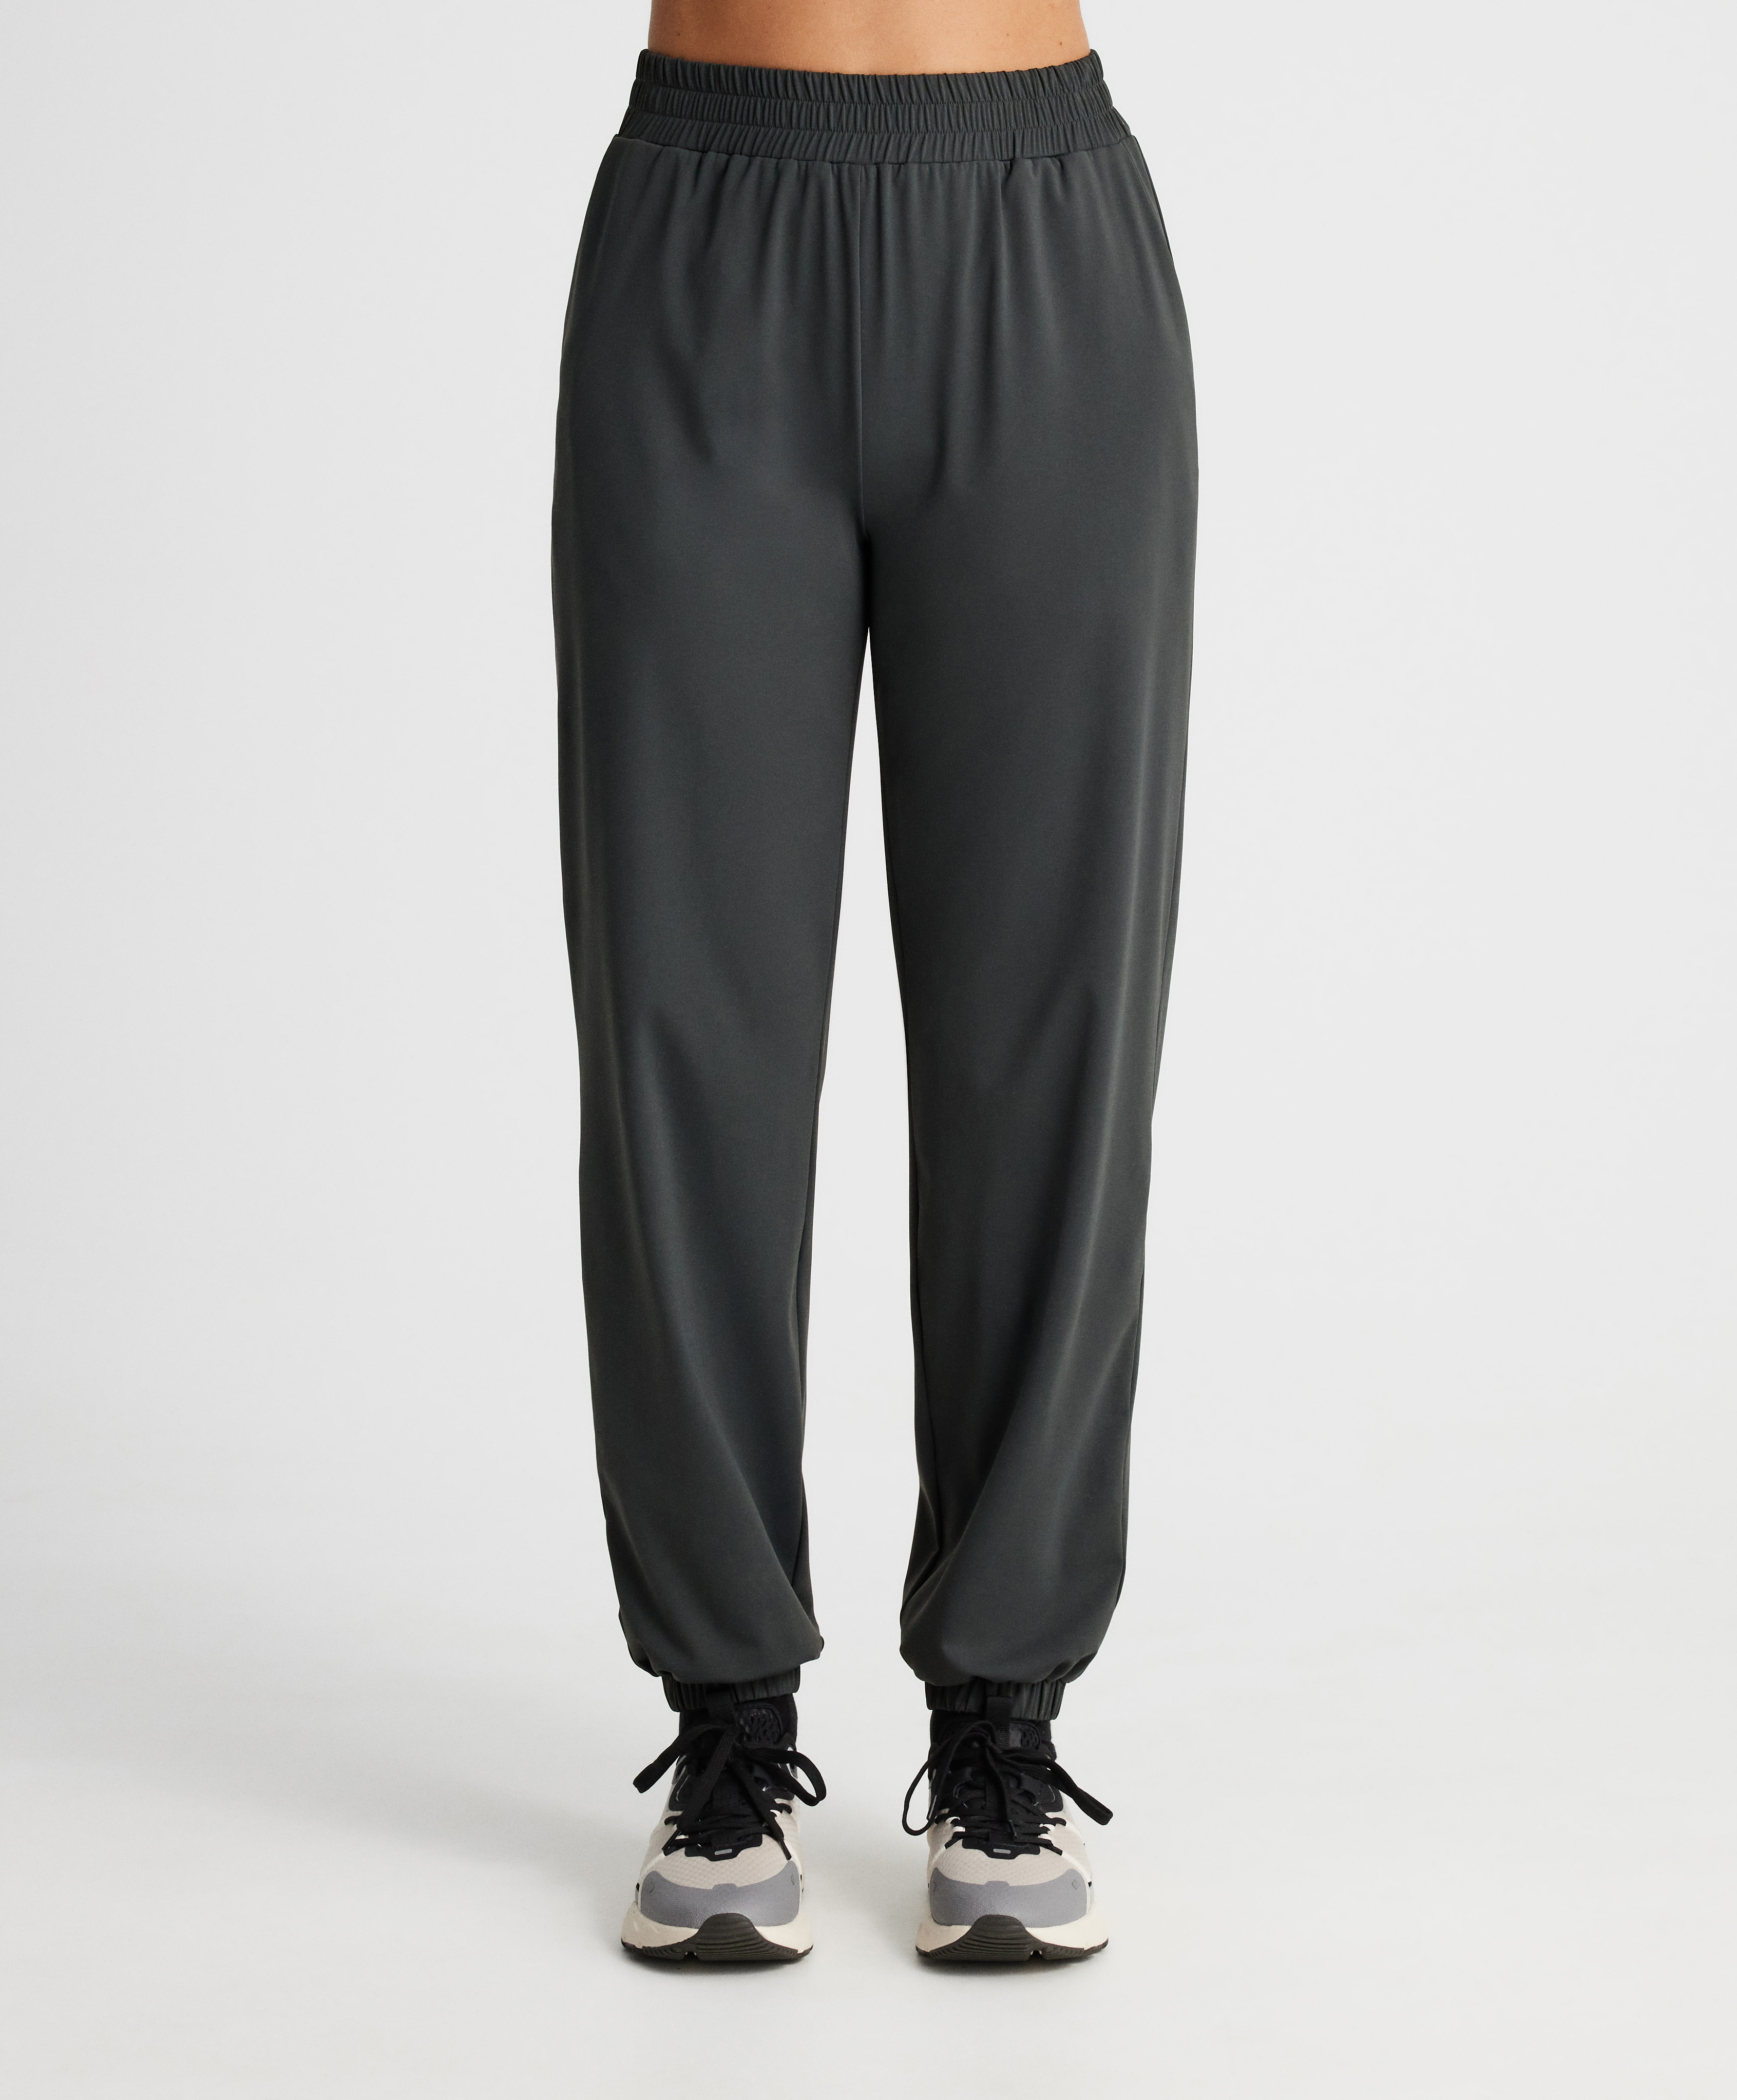 discount 67% Oysho tracksuit and joggers Black S WOMEN FASHION Trousers Tracksuit and joggers Shorts 